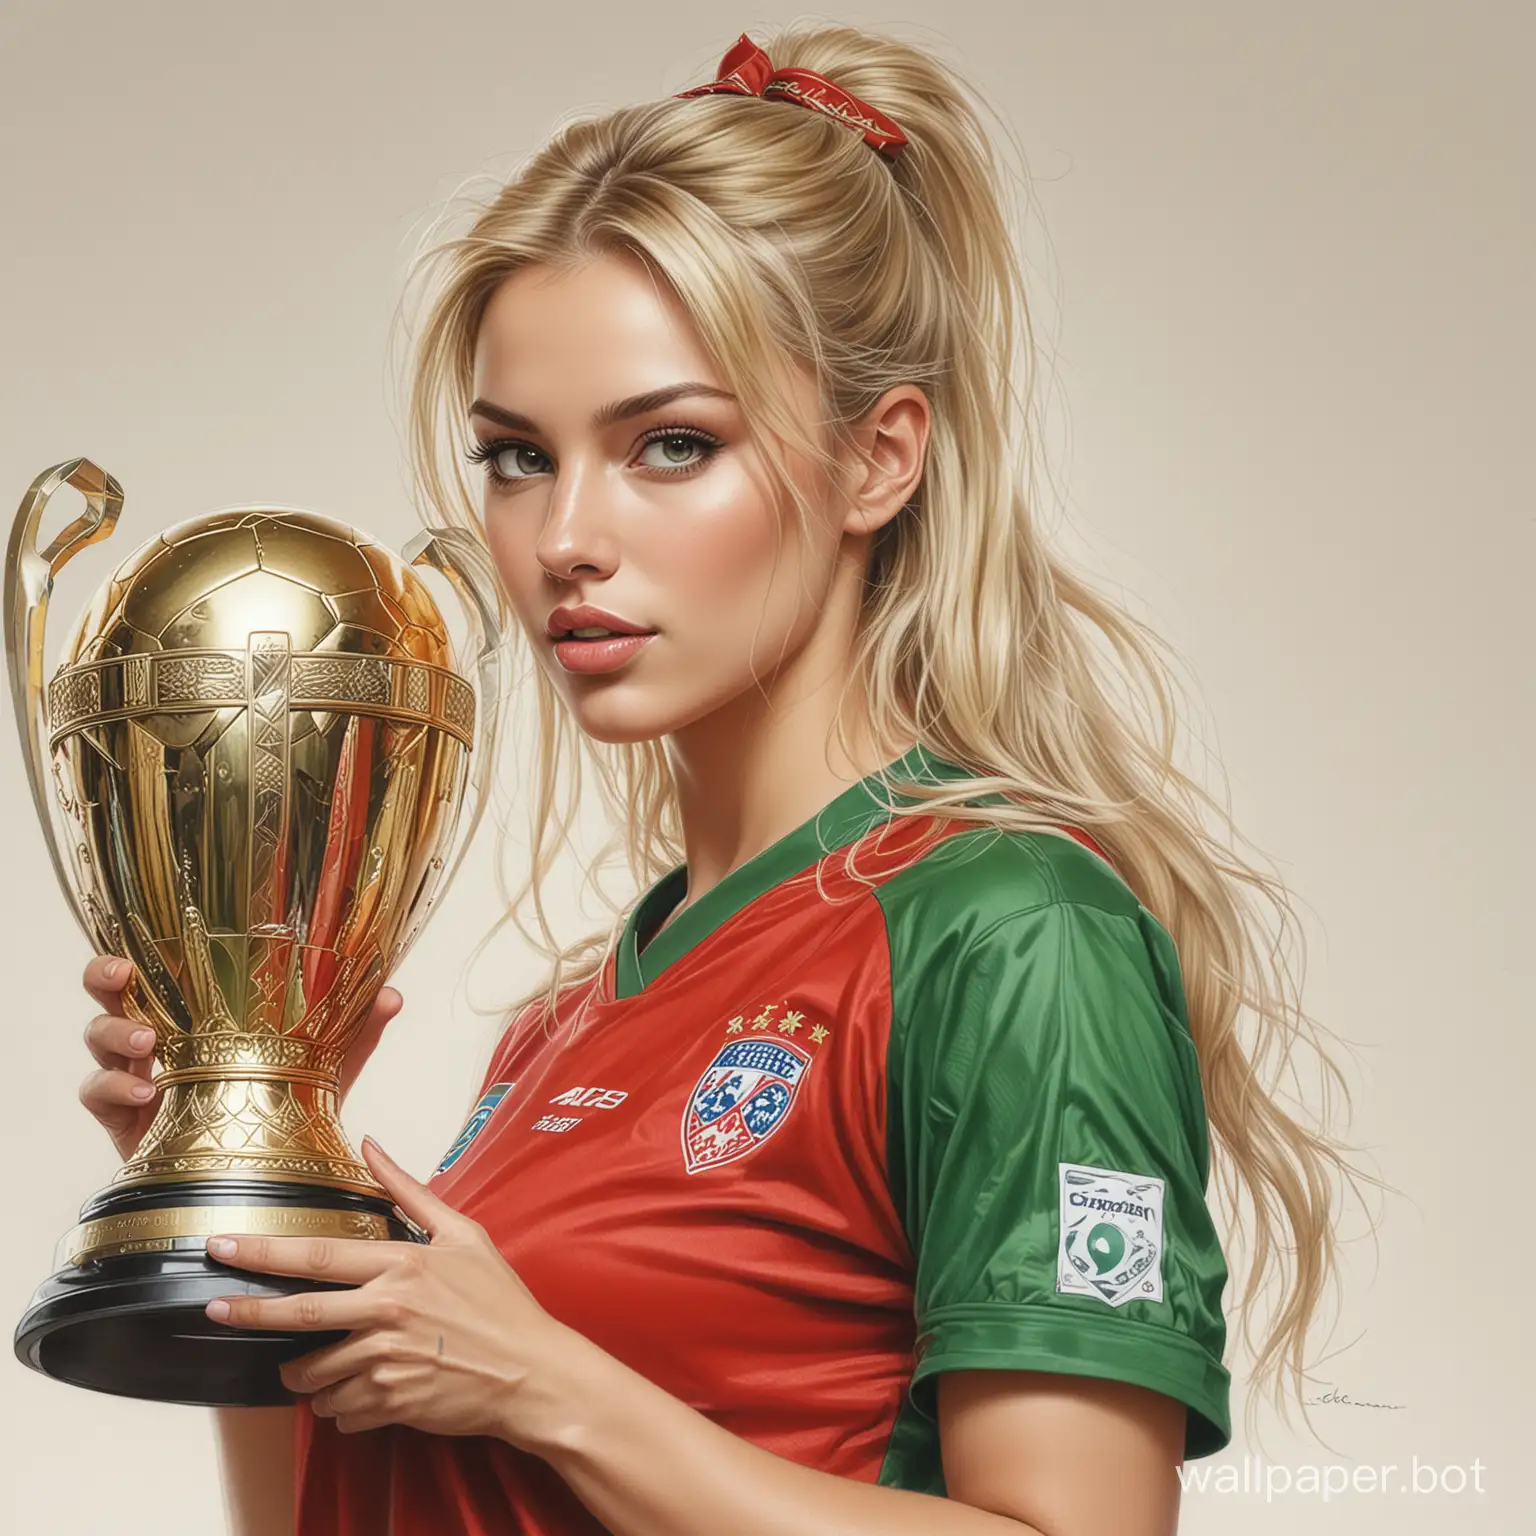 Blonde-Woman-Holding-Champions-Cup-in-GreenRed-Soccer-Uniform-Sketch